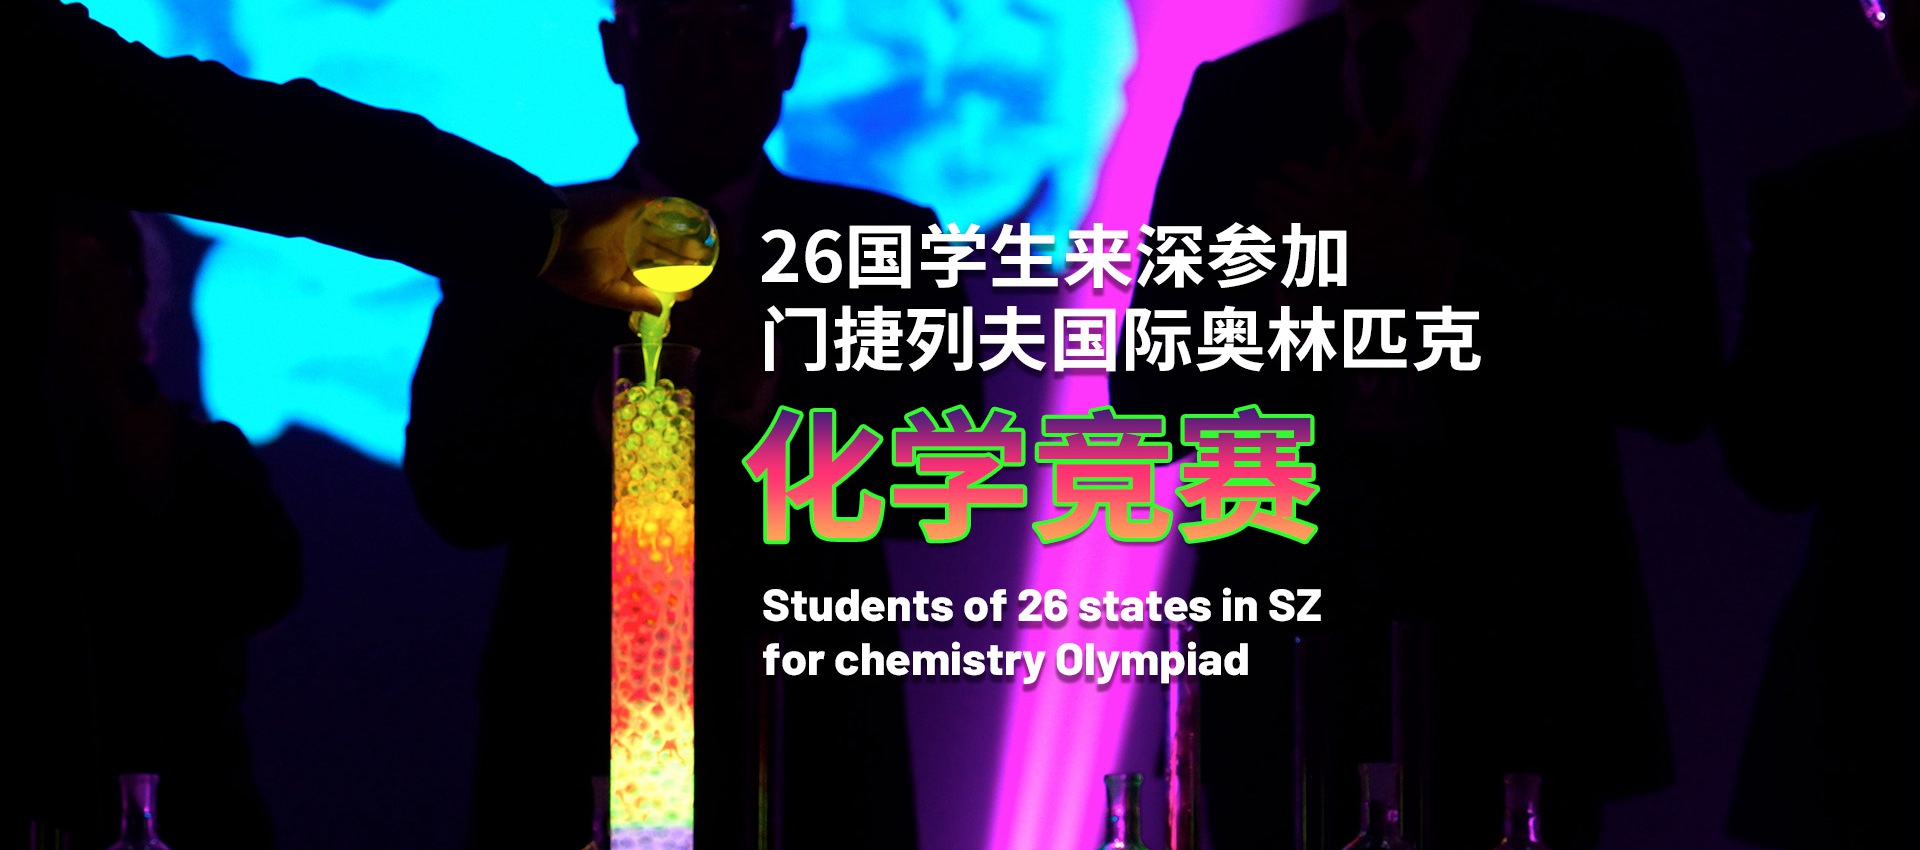 Students from 26 countries in SZ for chemistry Olympiad